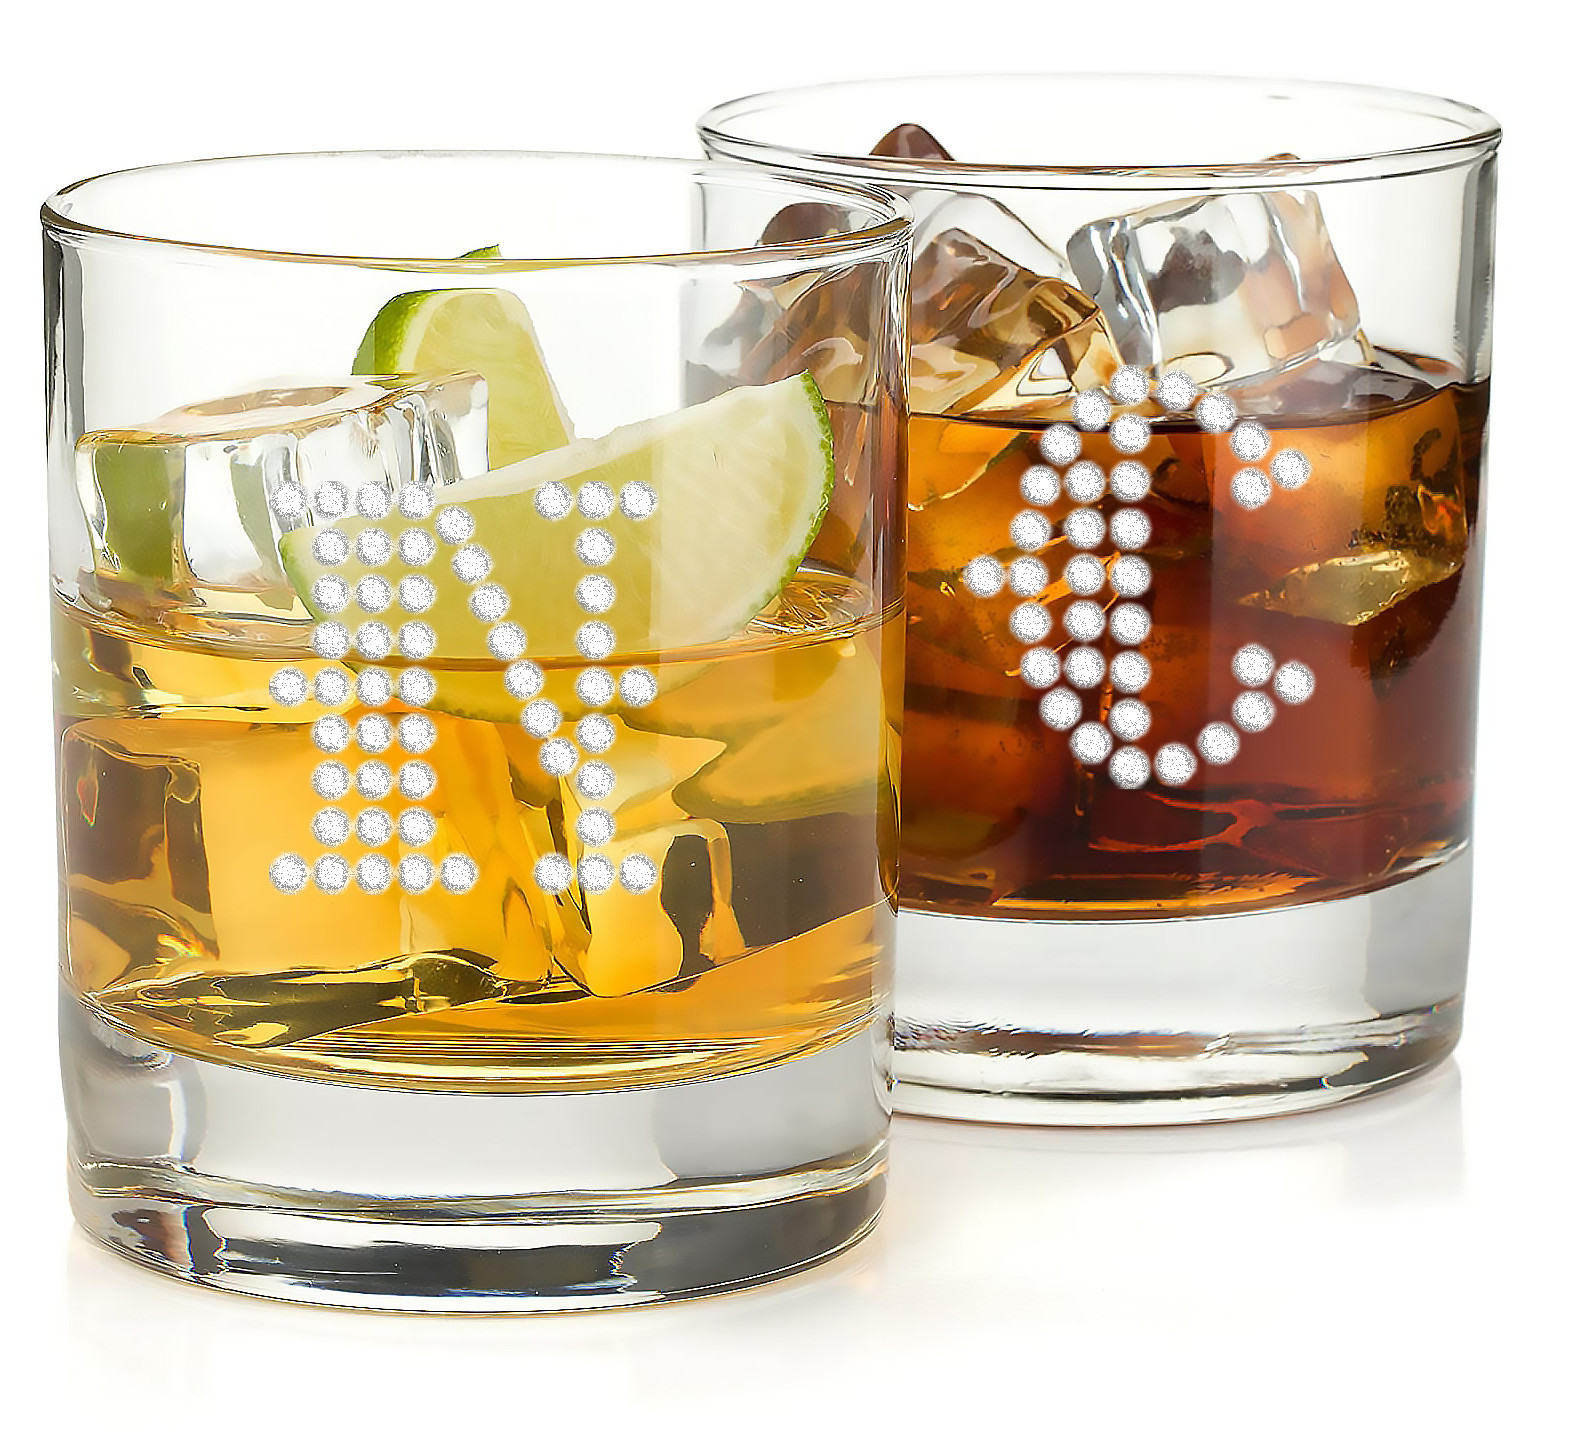 https://www.hansonellis.com/mm5/graphics/00000001/crystal-rhinestones-personalized-his-hers-whiskey-glasses-bourbon-scotch-coctail-glasses.jpg